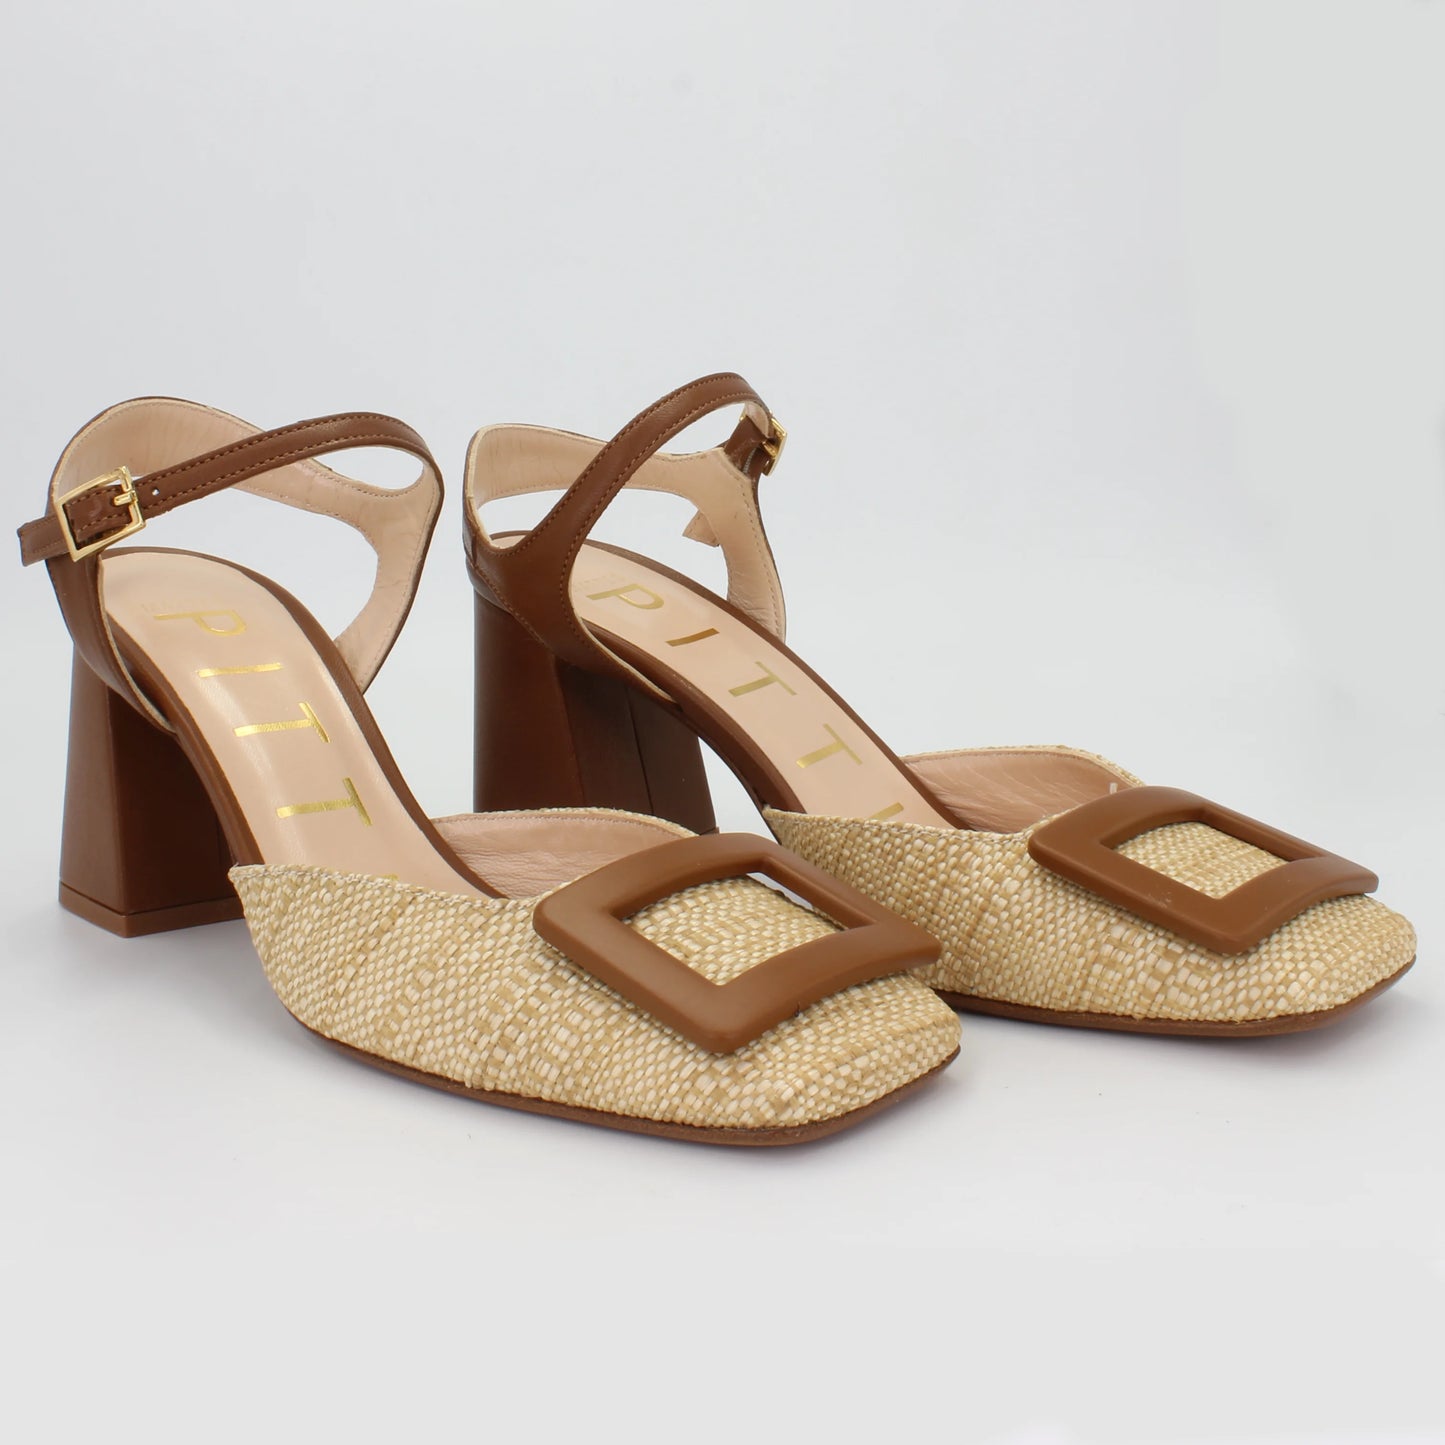 Shop Handmade Italian Leather Block Heel in Raffia Cuoio (MP17102) or browse our range of hand-made Italian shoes for women in leather or suede in-store at Aliverti Cape Town, or shop online. We deliver in South Africa & offer multiple payment plans as well as accept multiple safe & secure payment methods.